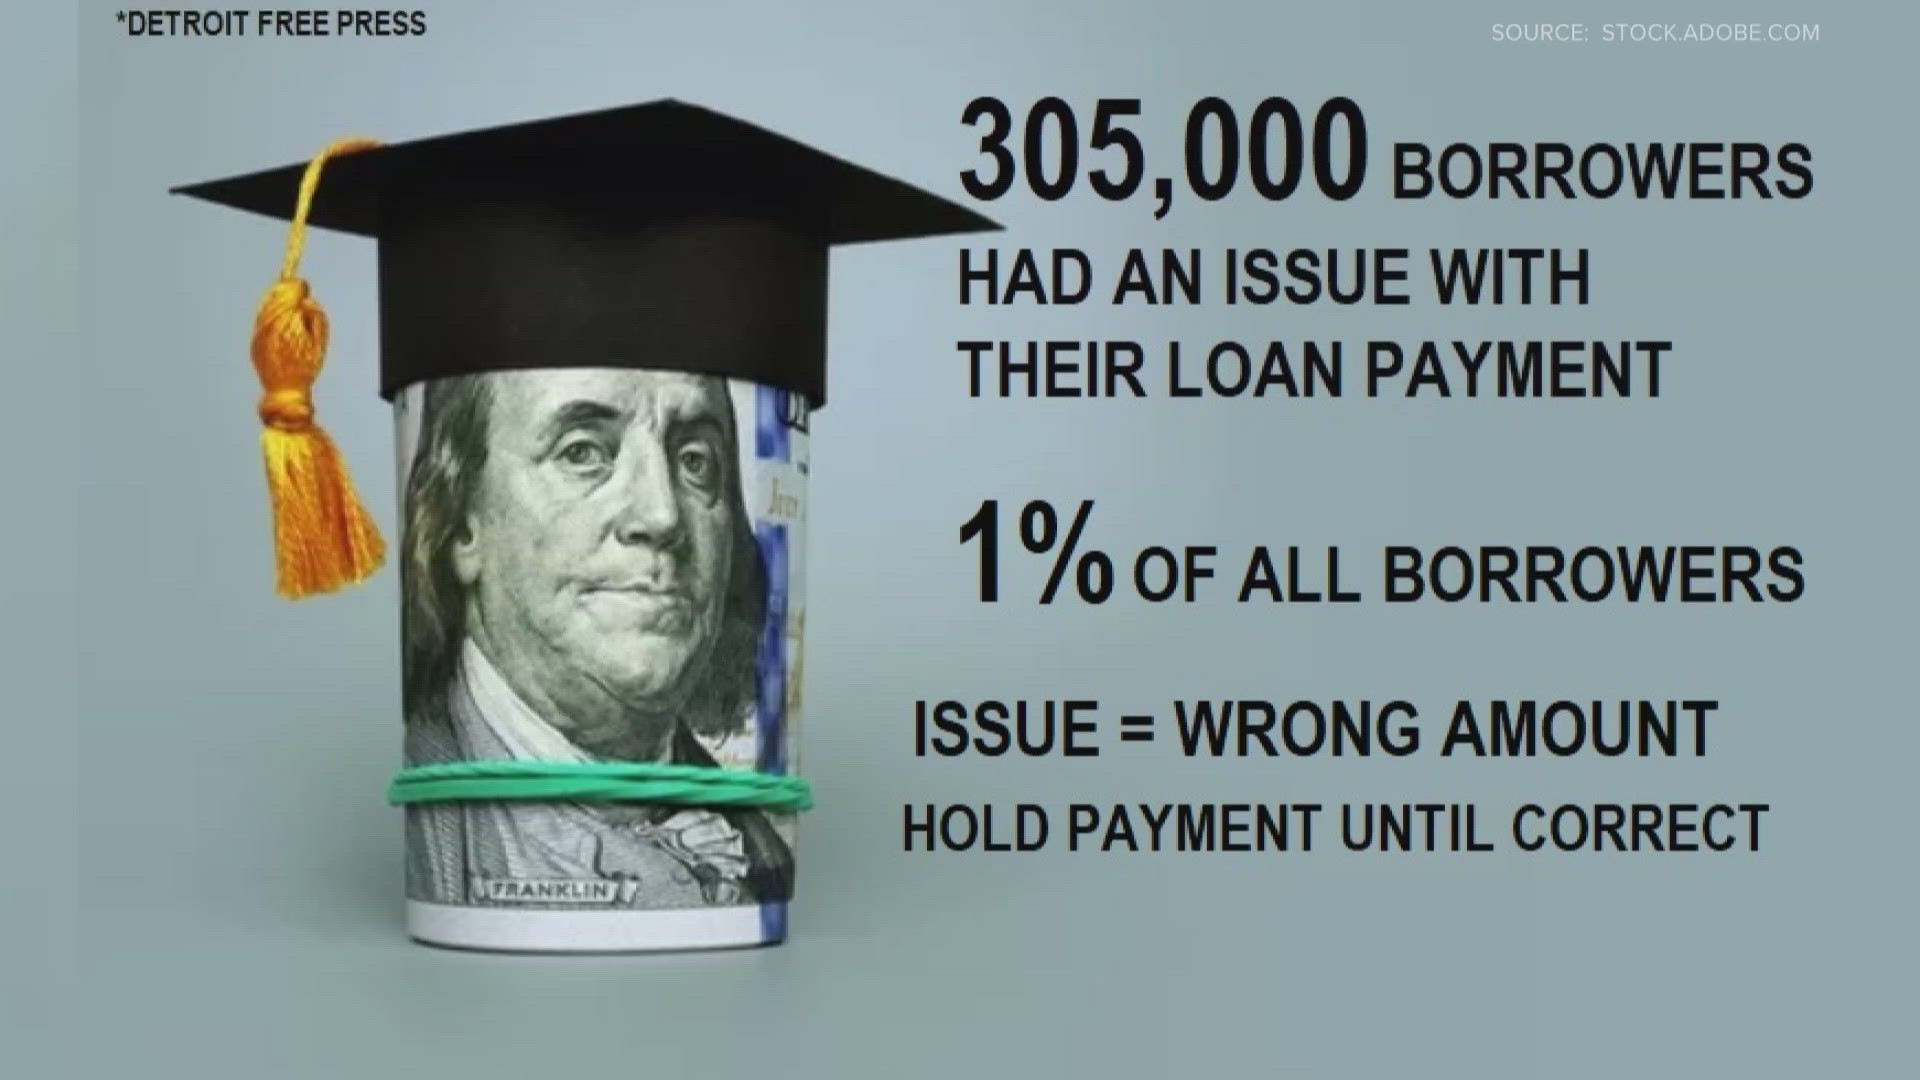 Hundreds of thousands of borrowers are getting the wrong price when going to make a payment.